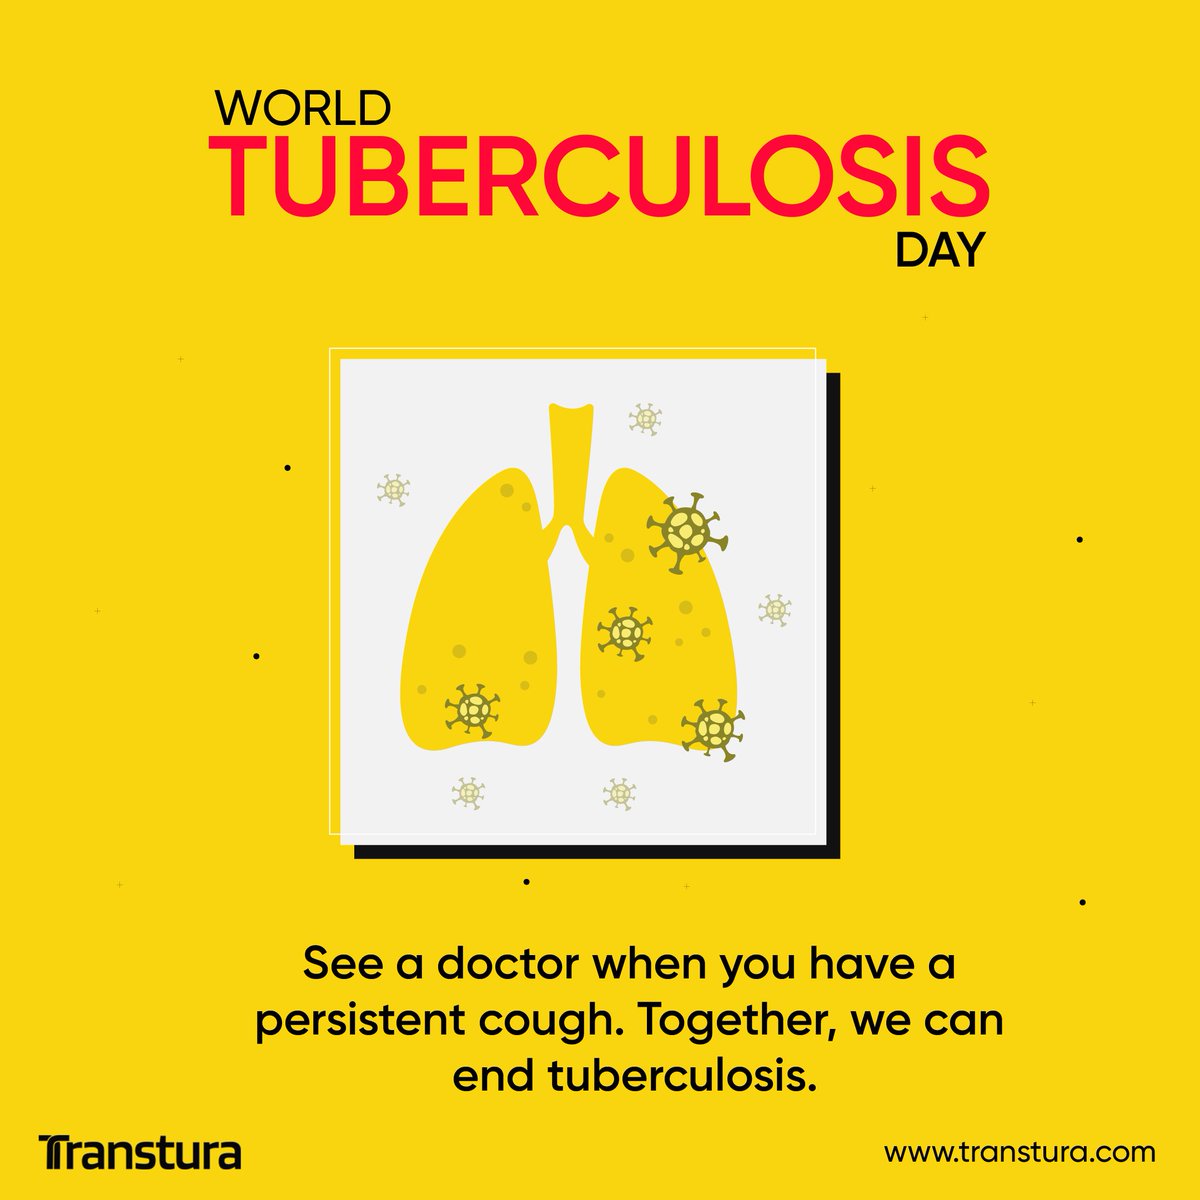 'World Tuberculosis Day

Together, we can defeat TB and set this world free from its grip.'#worldtuberculosısday #worldtuberculosisday #worldtuberculosisday2023 #tuberculosisday #tuberculosisdays #stayhealthy #stayhealthyandfit #stayhealthyandstrong